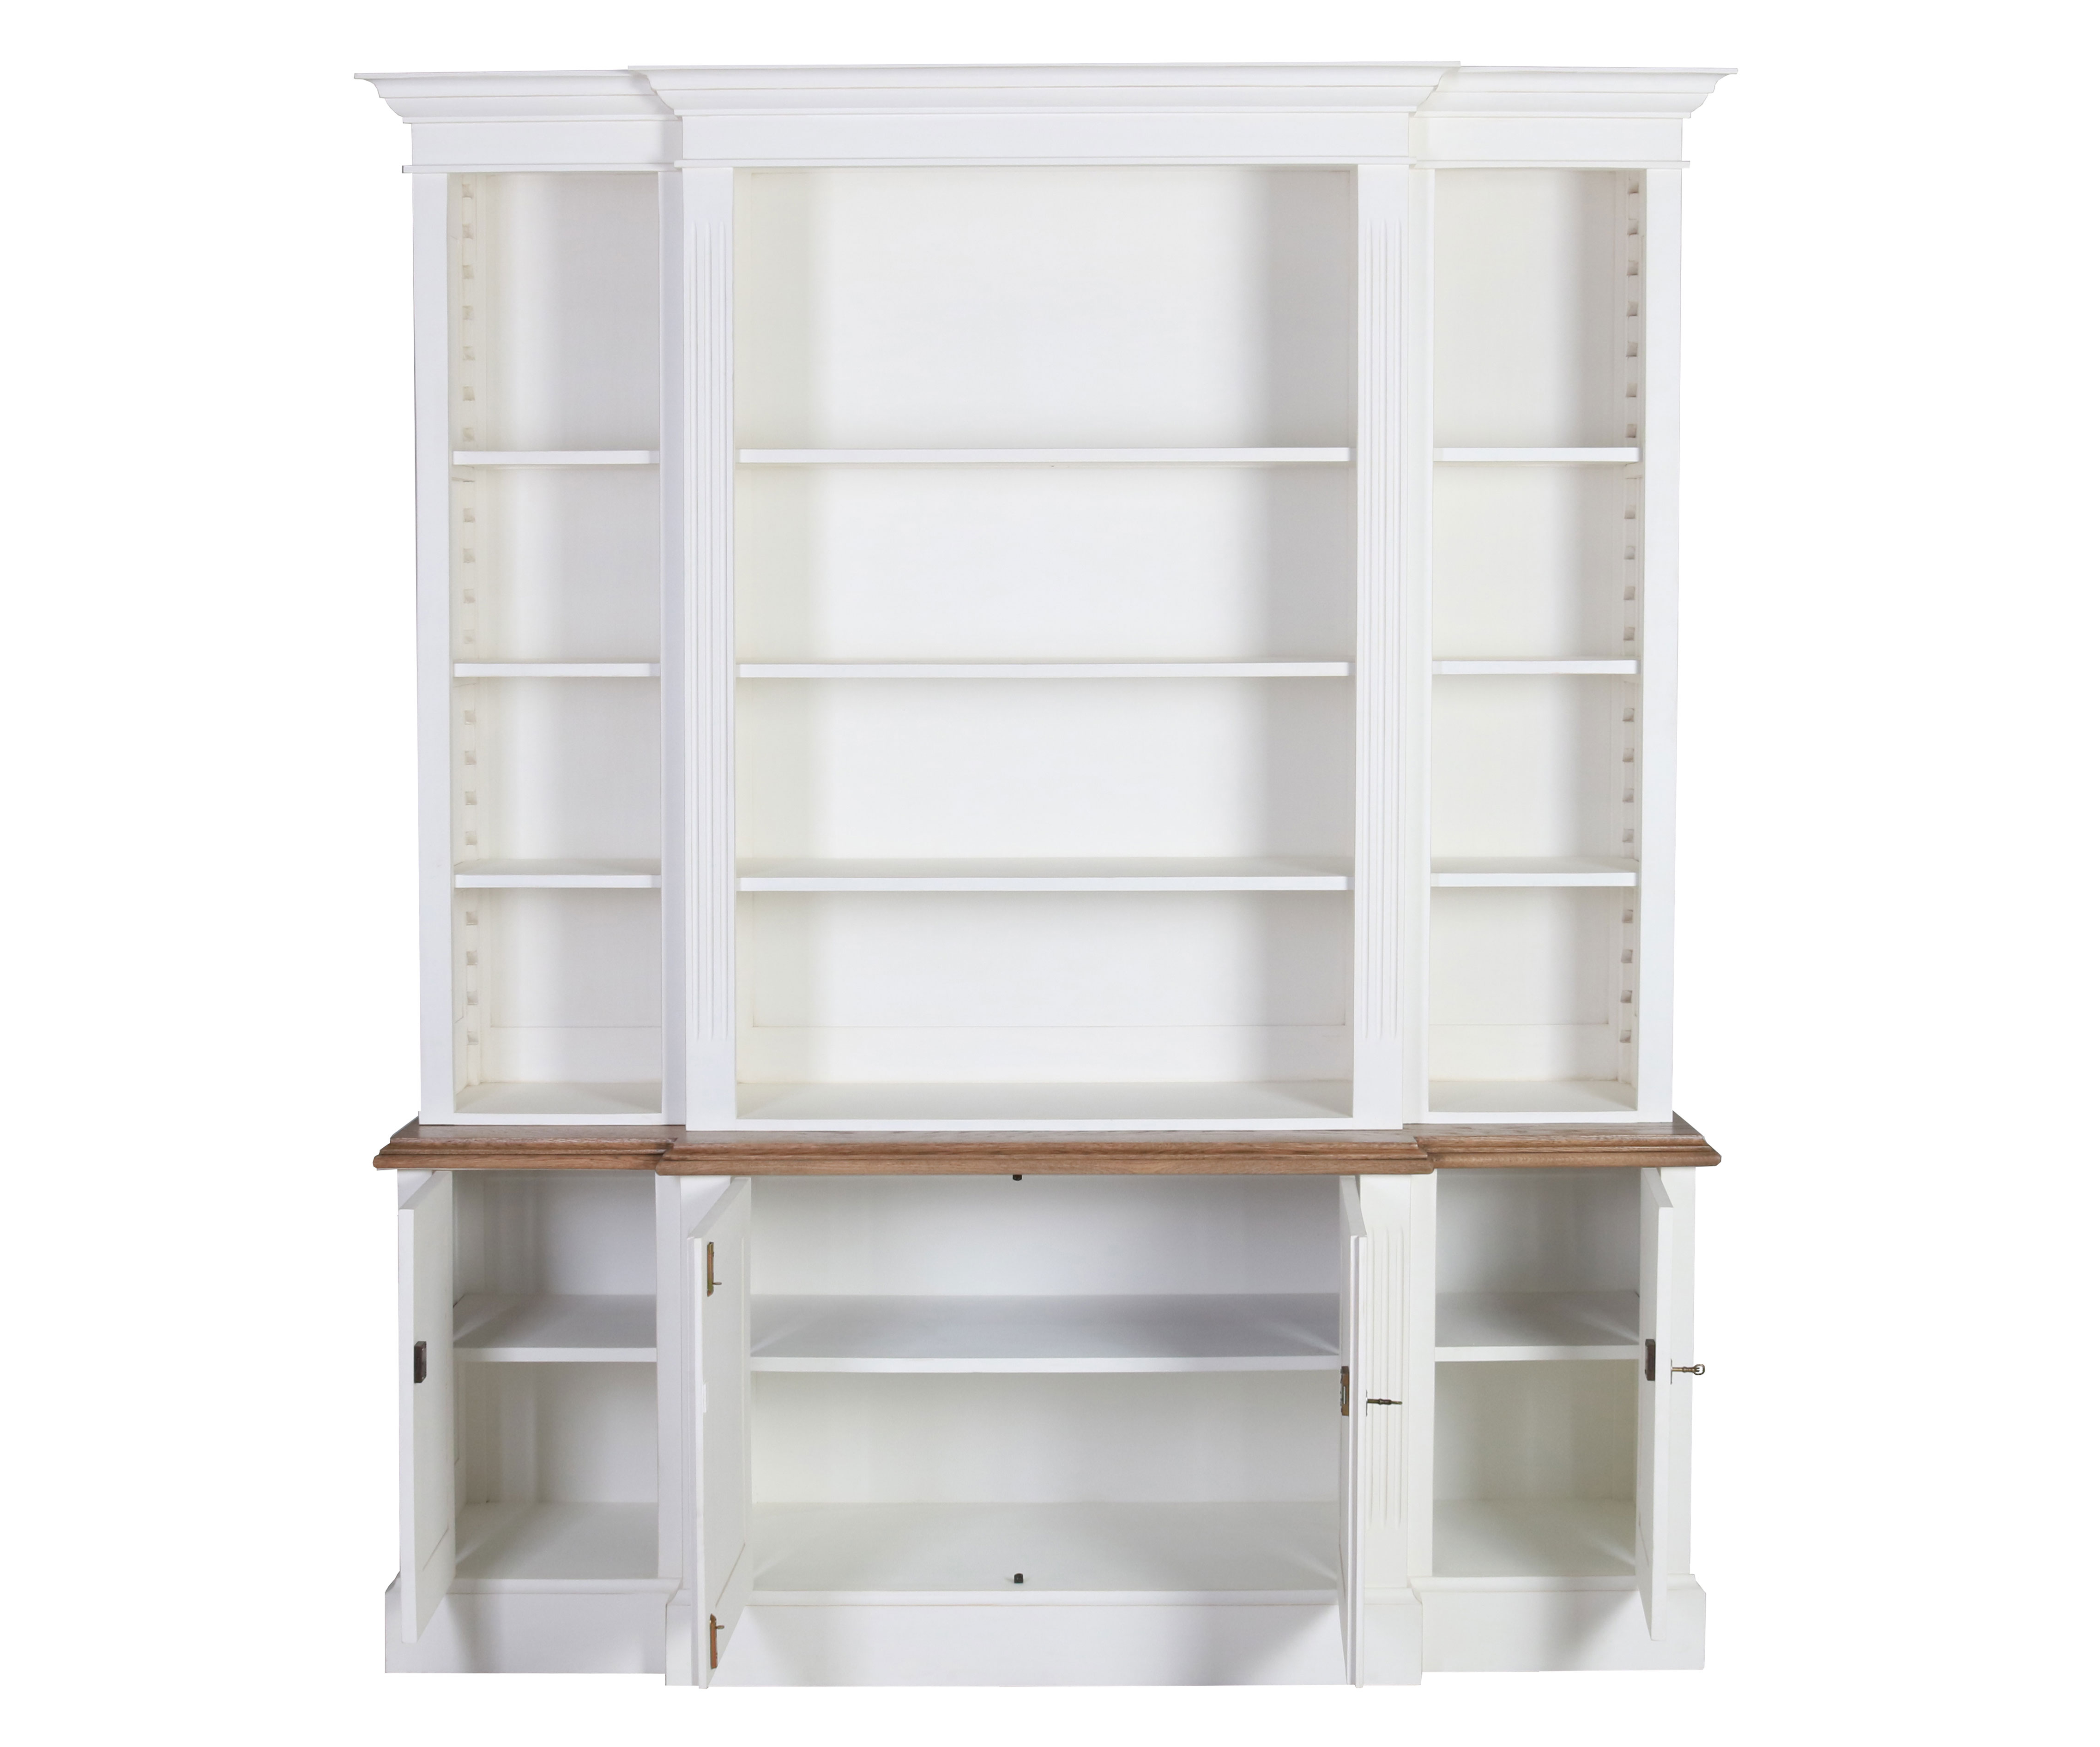 Ecs breakfront bookcase in antique white and weathered oak